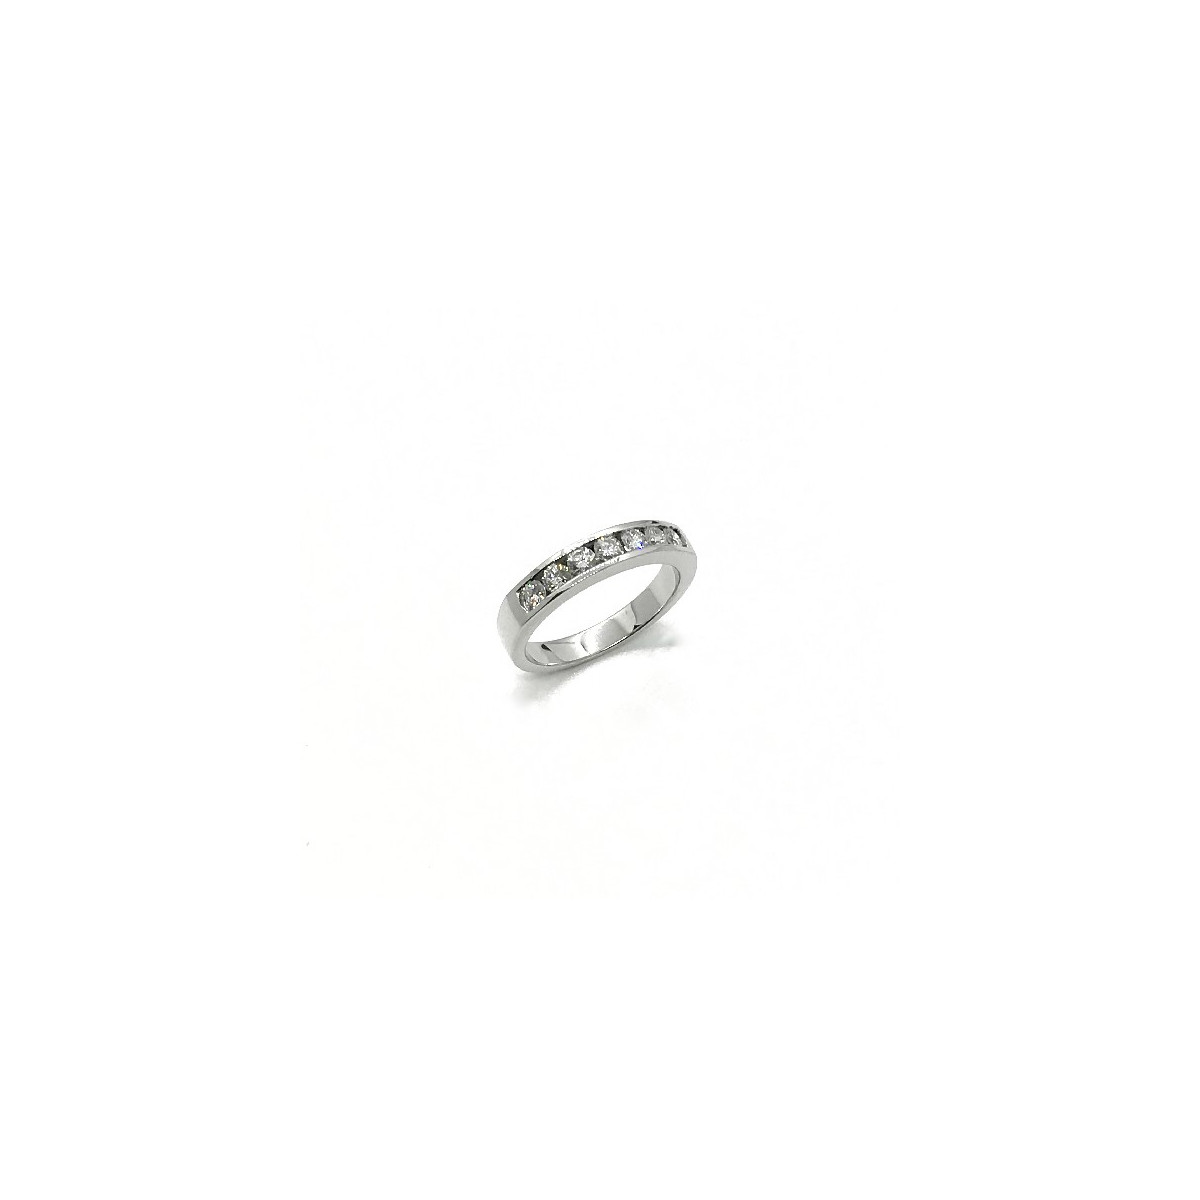 HALF ALLIANCE CLIMENT 1890 RING - S-2052/BR